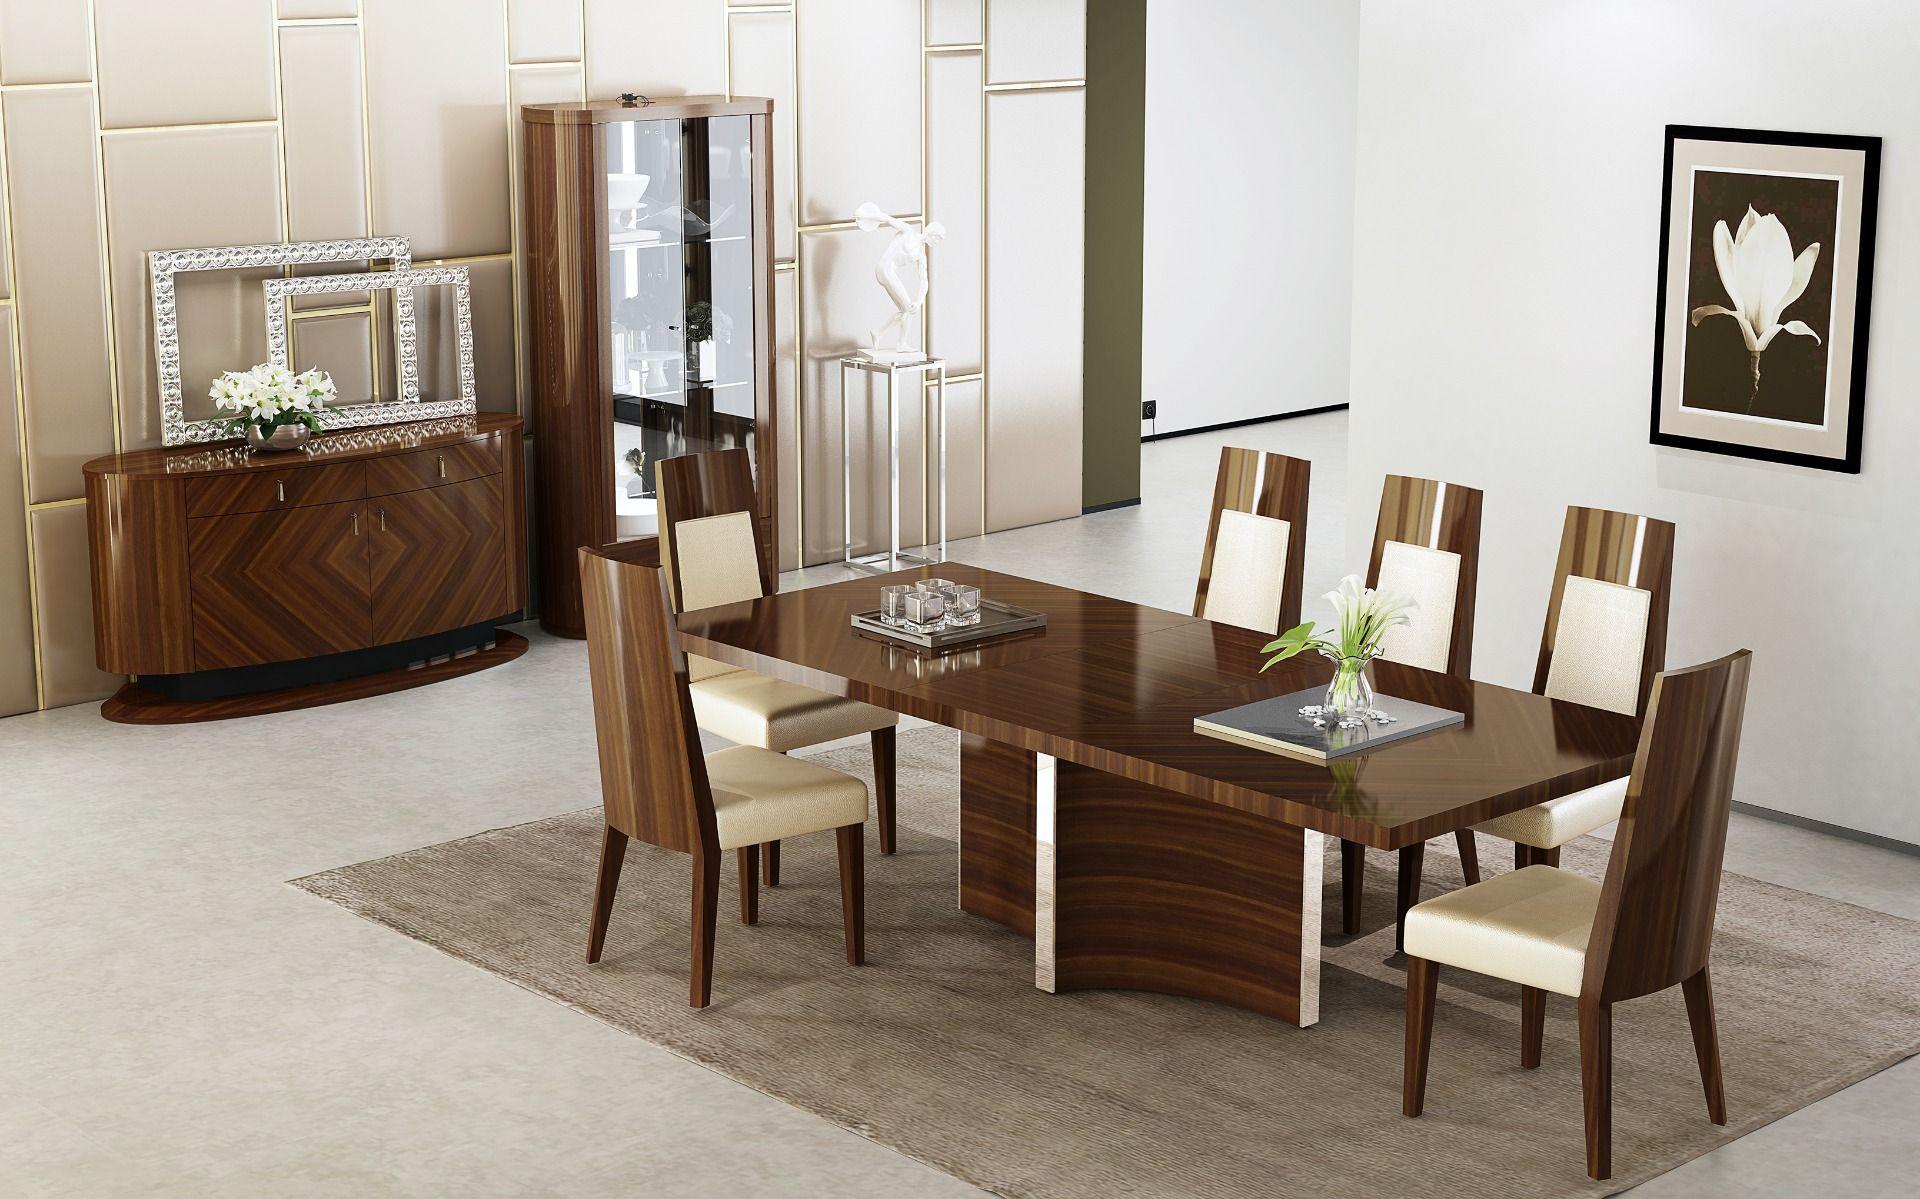 Contemporary, Modern Dining Table Set DT-P109 / CK-P109 DT-P109-7PC in Dark Brown 